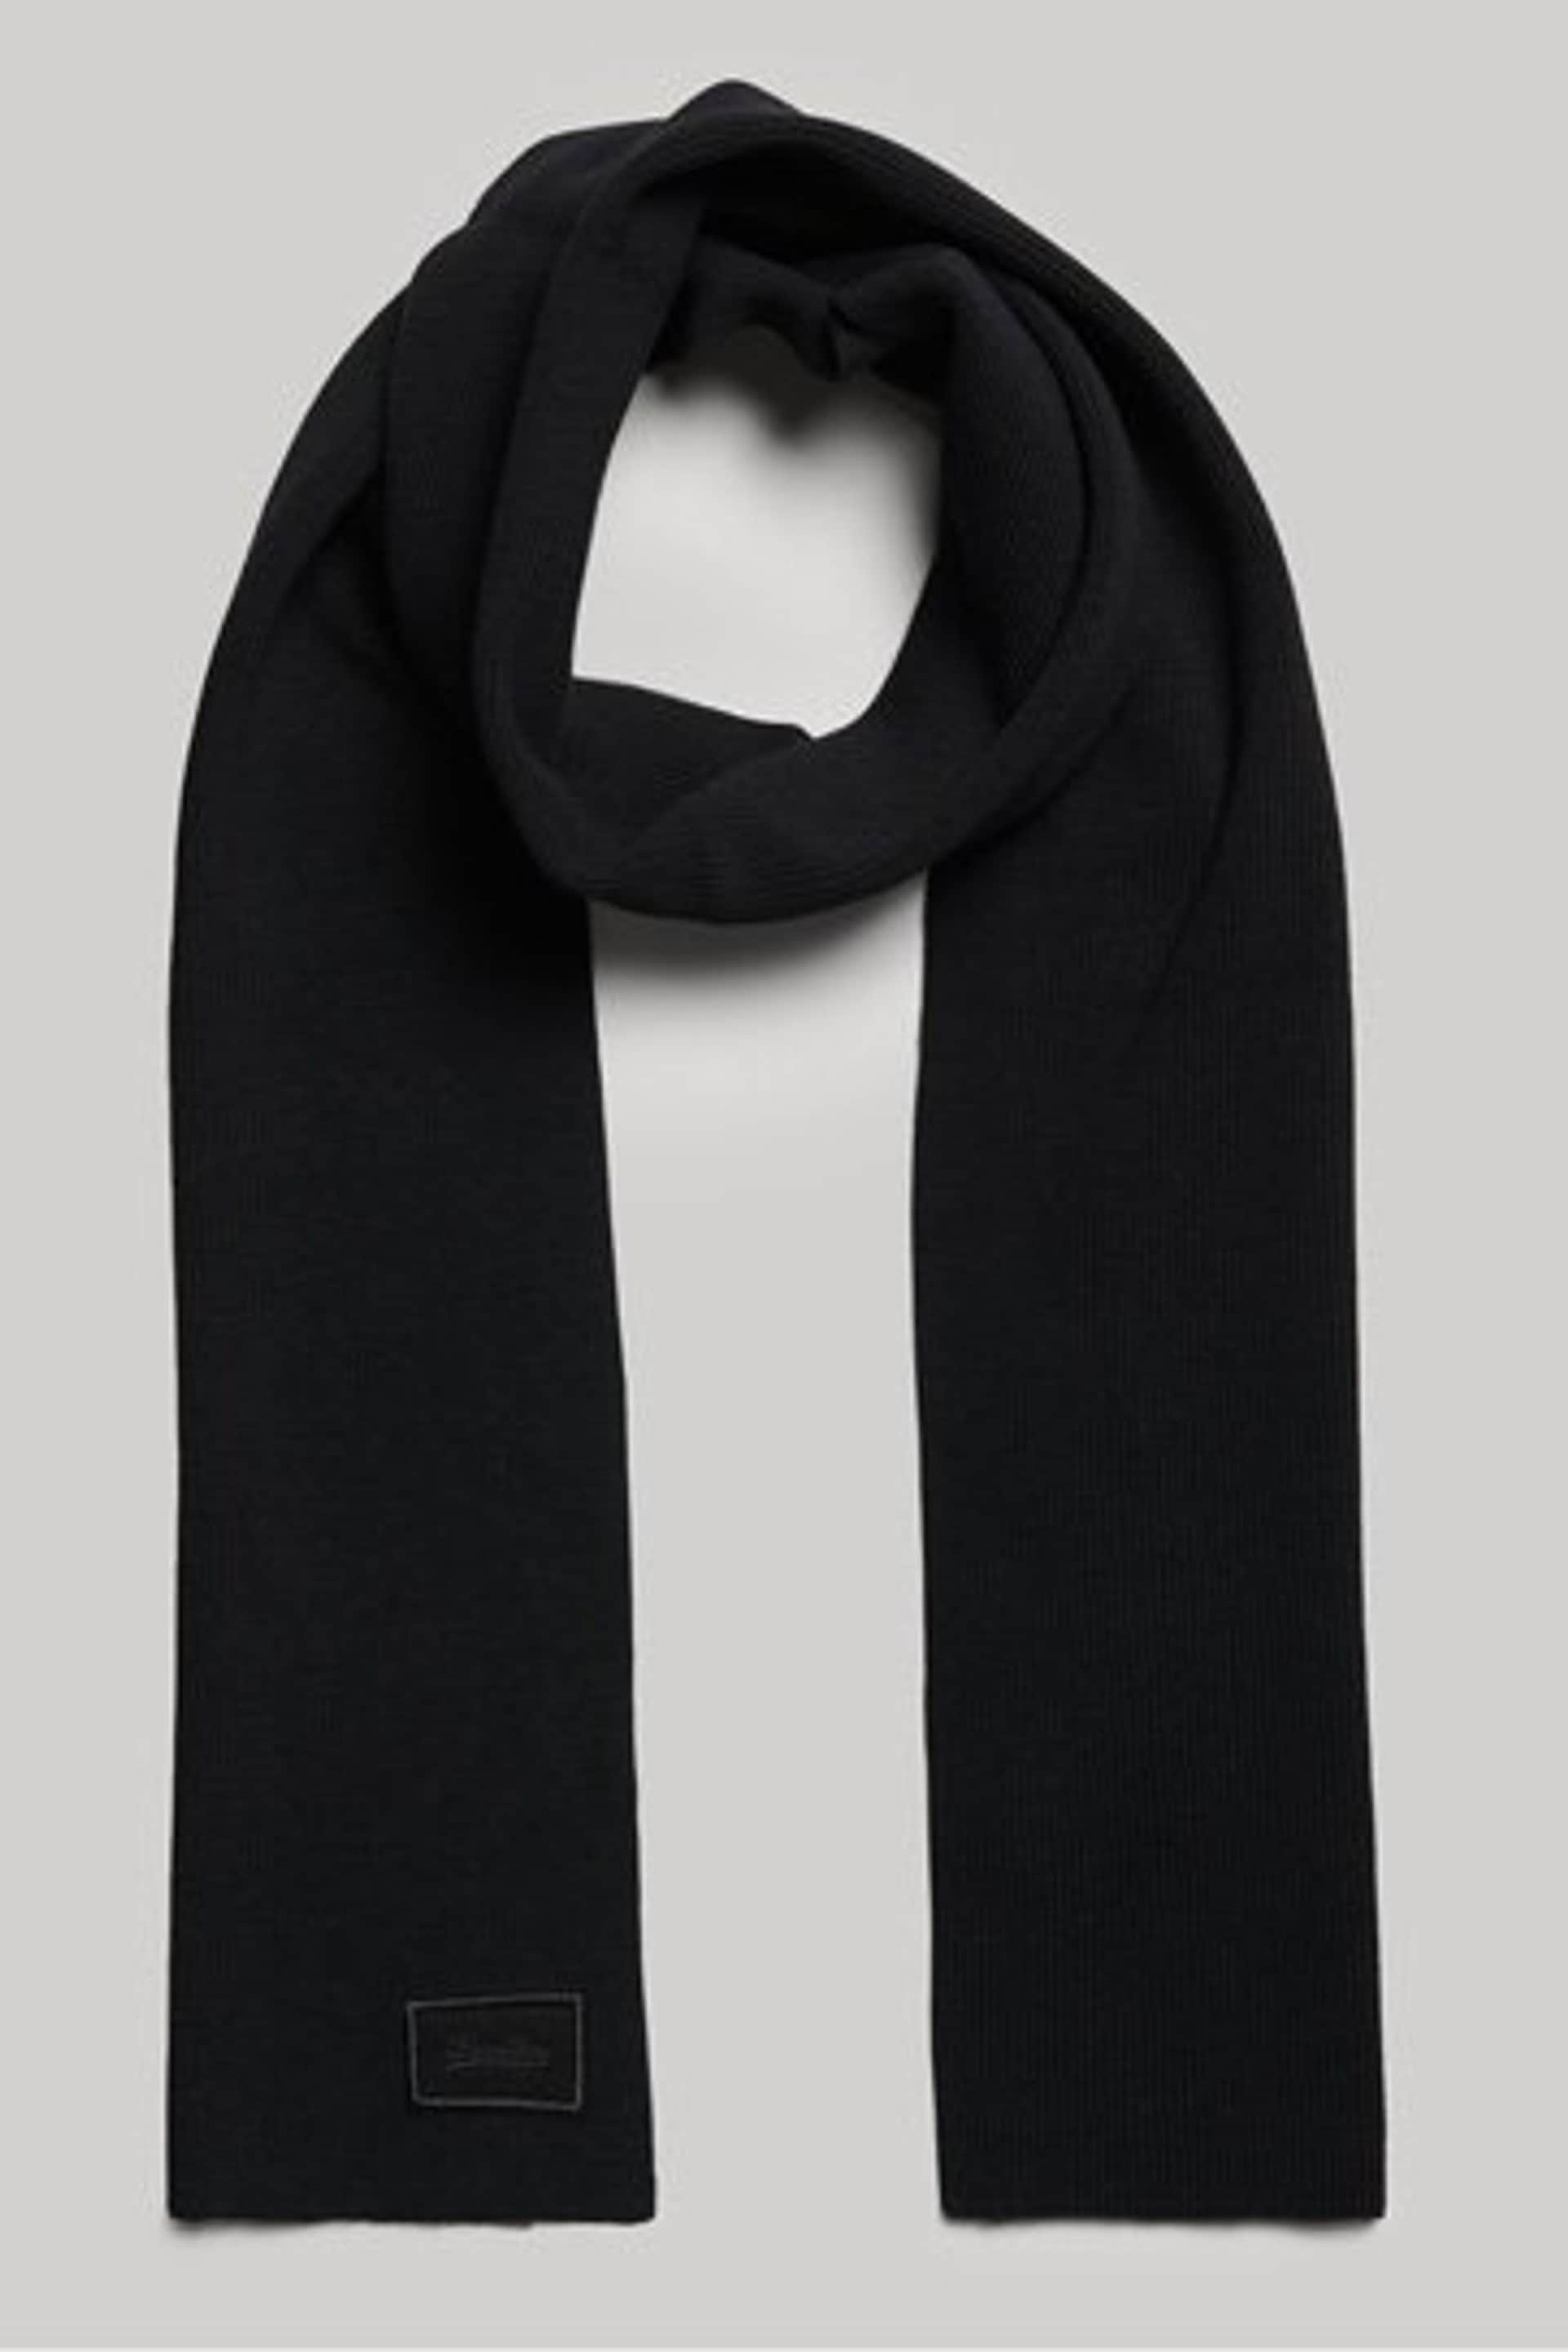 Superdry Black Knitted Logo Scarf - Image 2 of 3